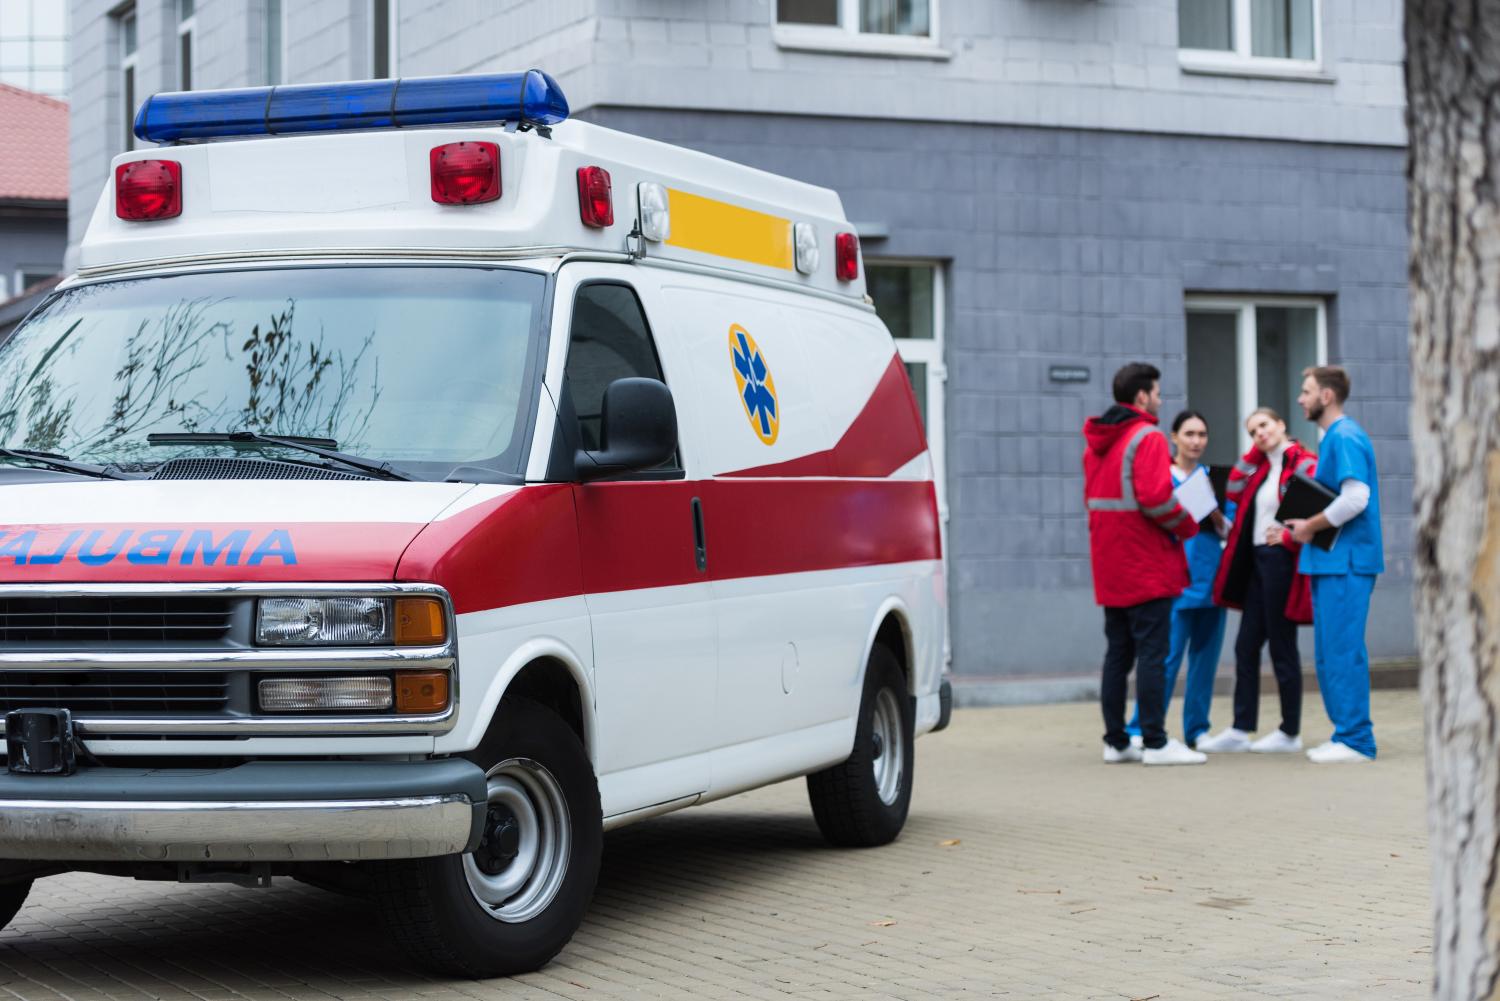 Group of people talking next to an ambulance